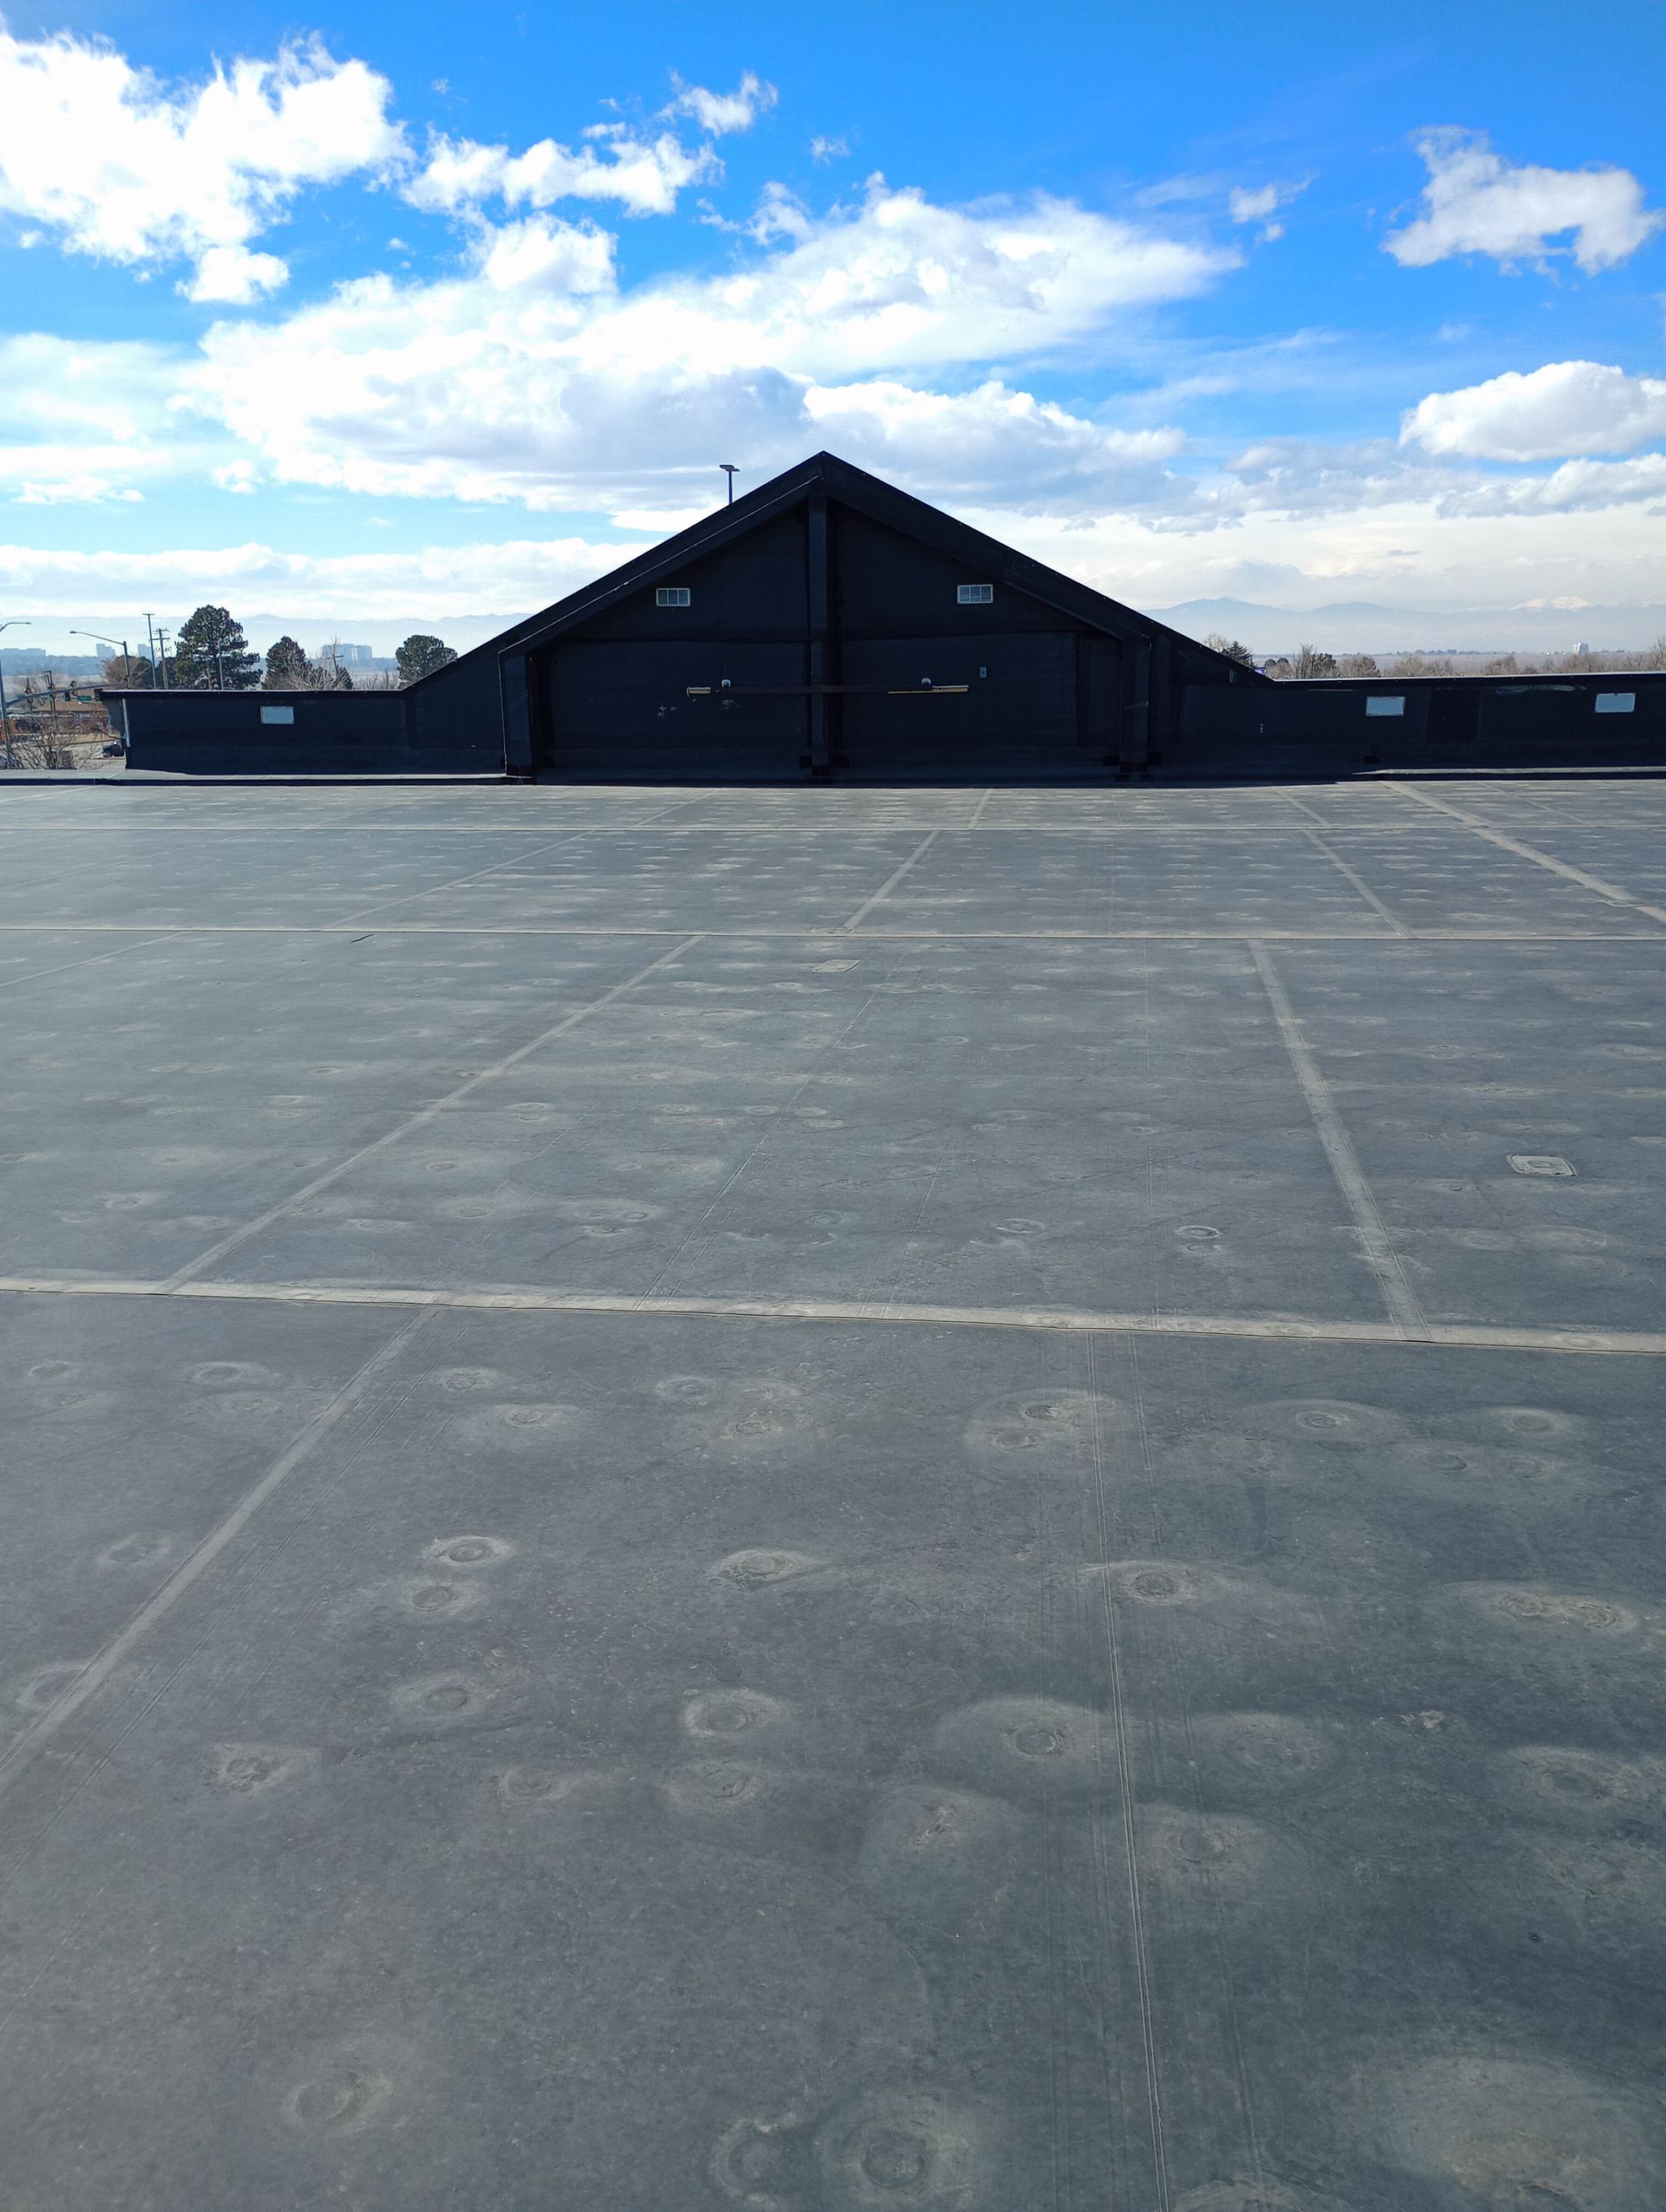 Commercial flat roof installation,replacement cost, repair, materials, flat roof types, flat roofer